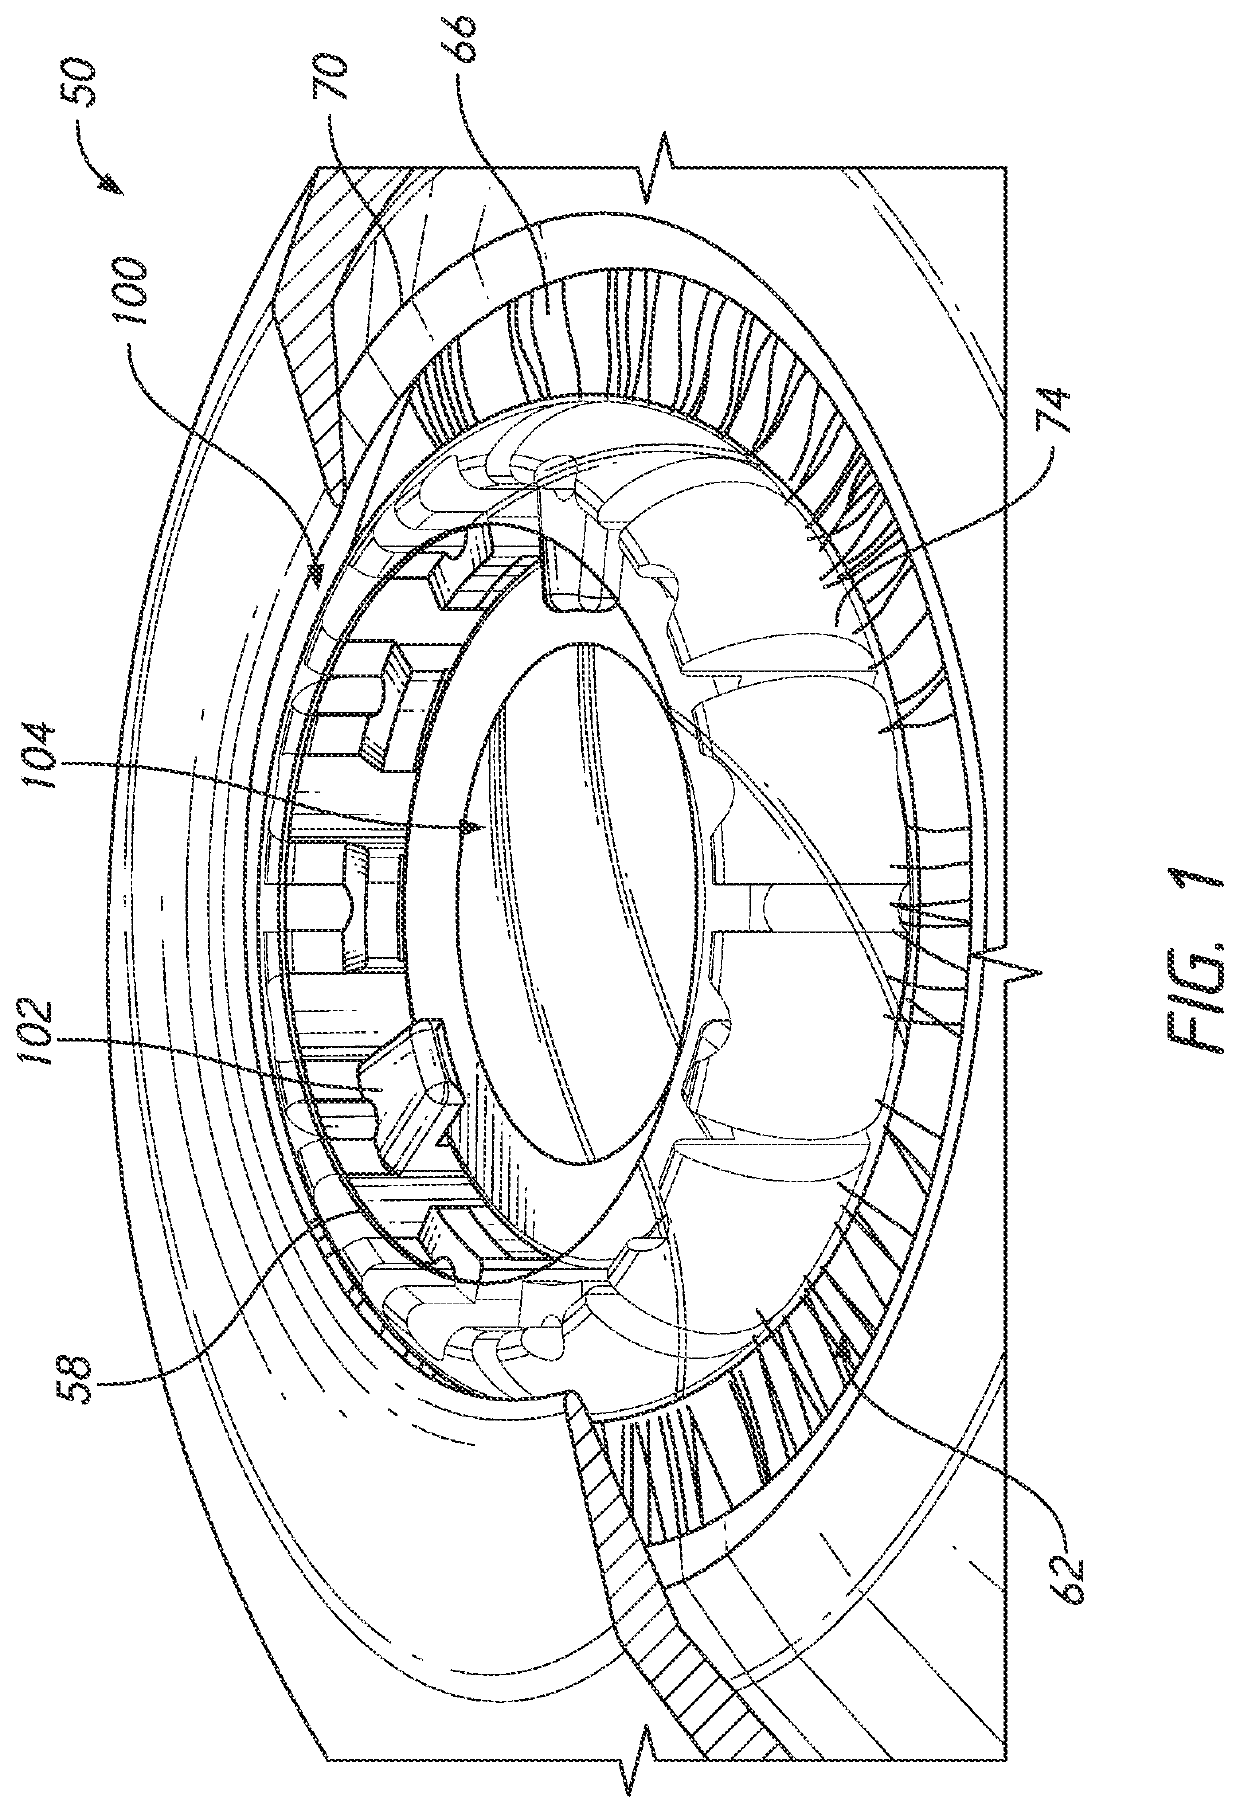 Intraocular lens device and related methods